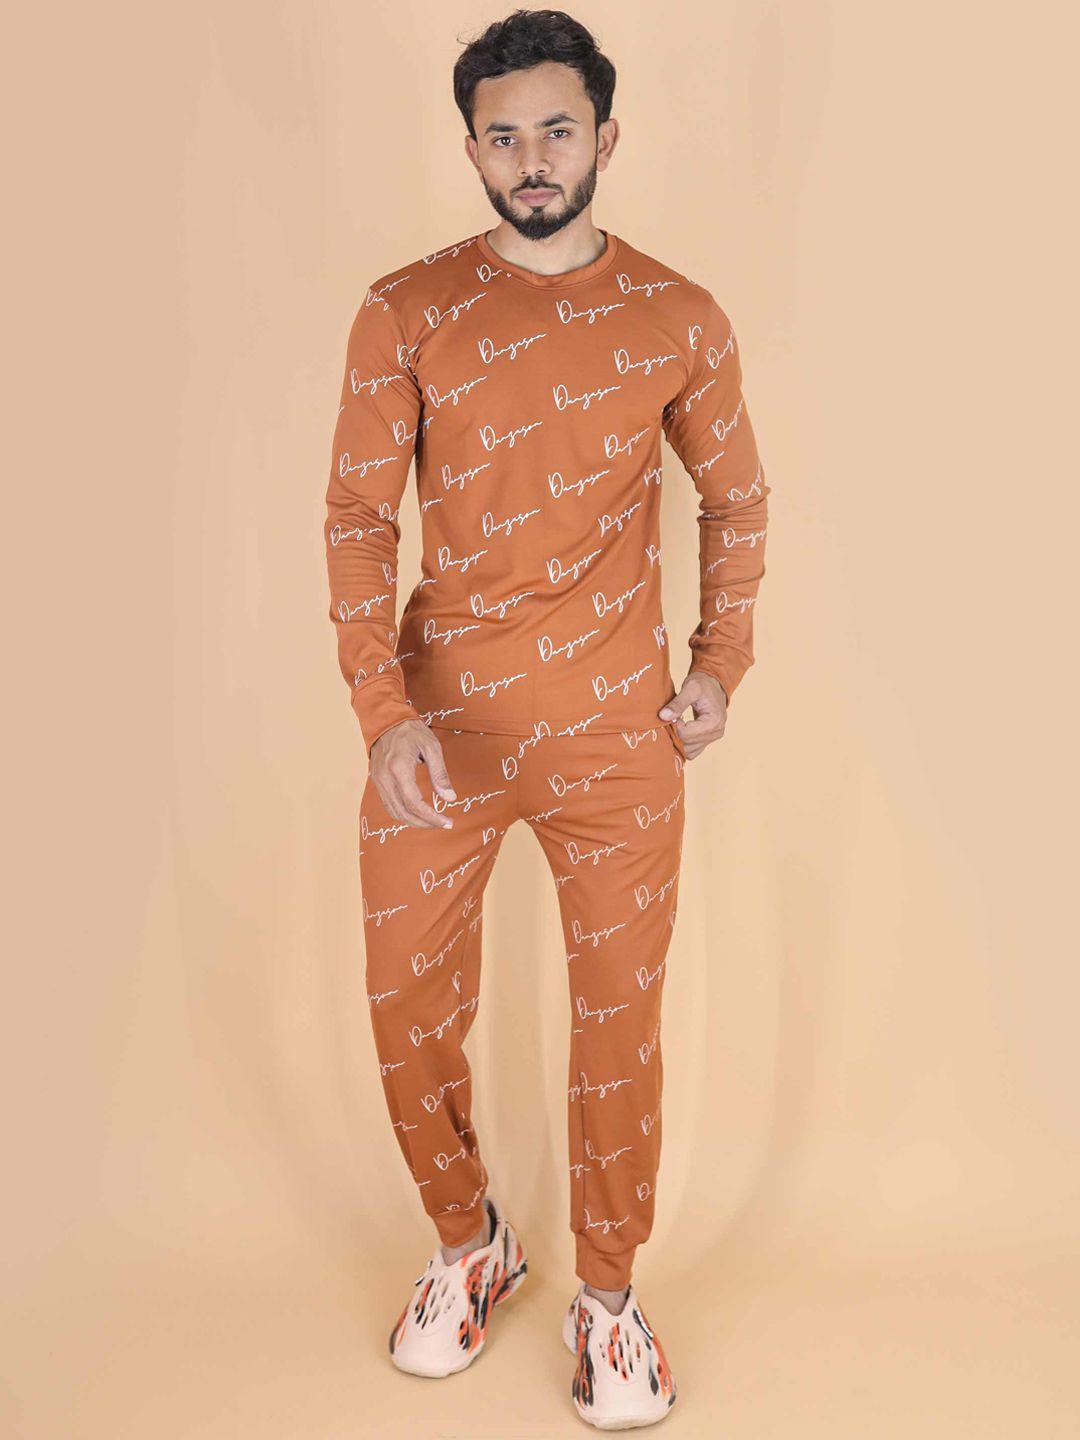 danza-son typography printed round neck tracksuits set